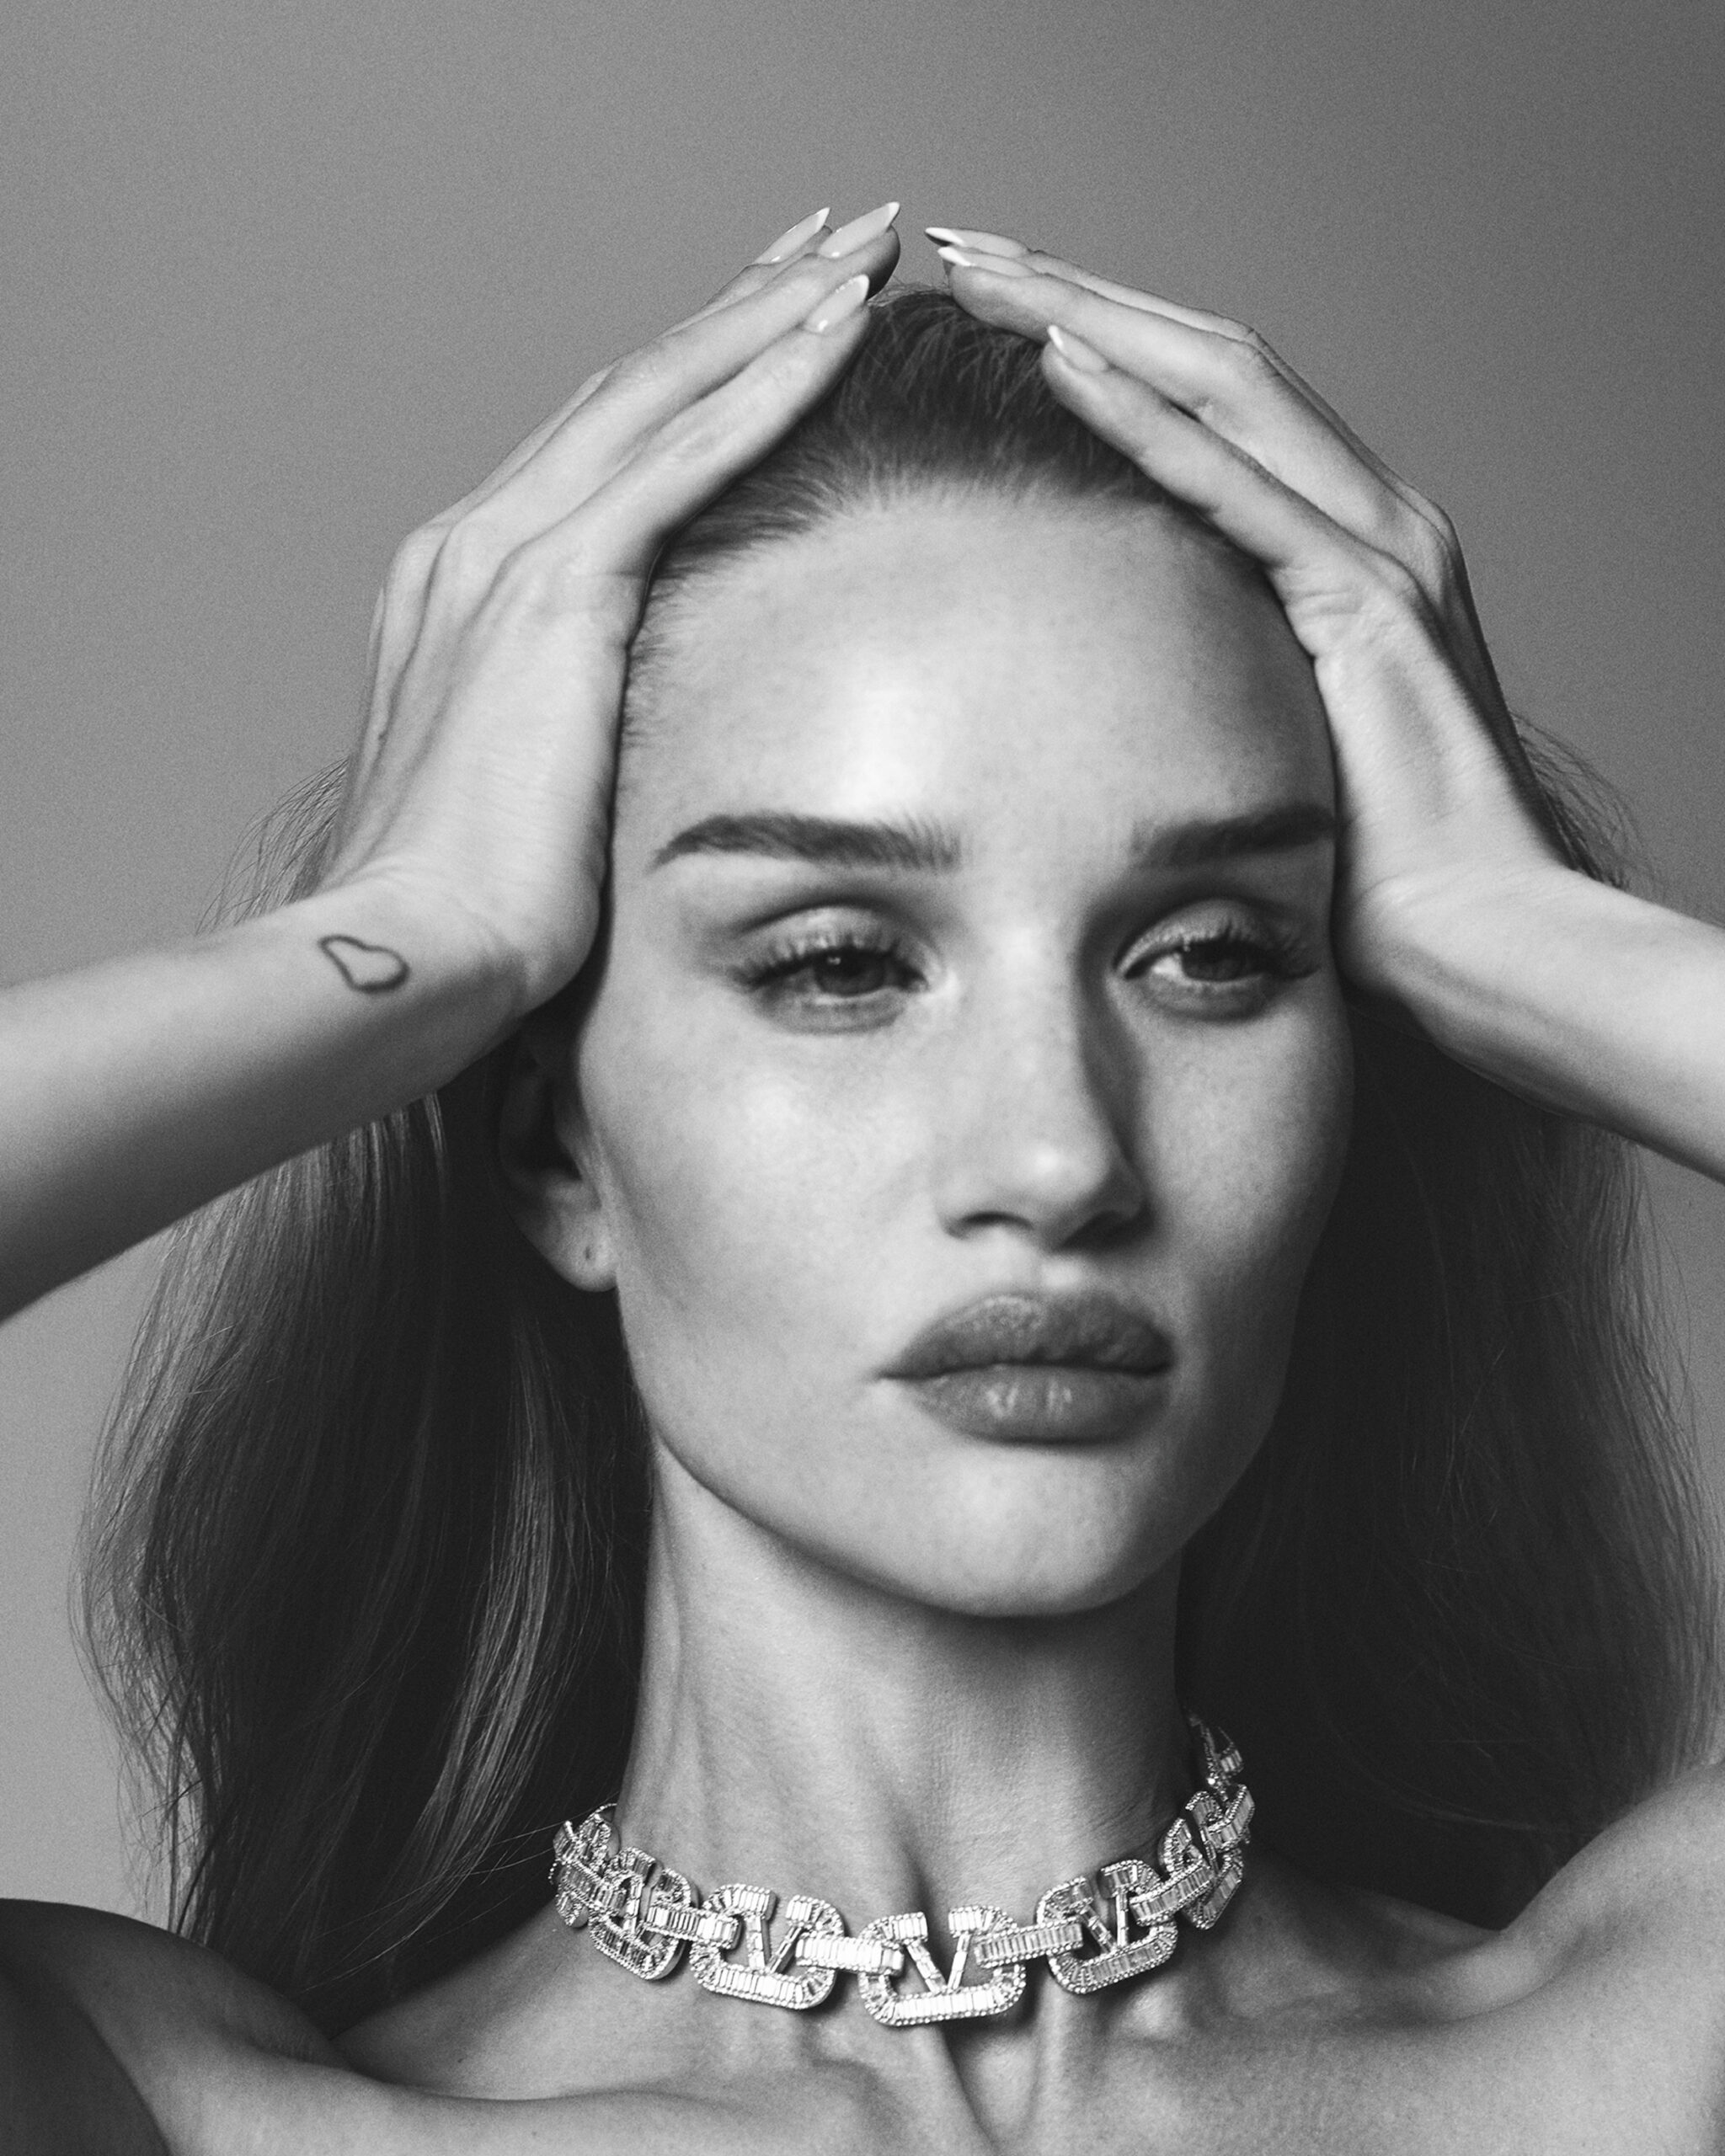 anders rolland recommends Rosie Huntington Whiteley Photoshoot